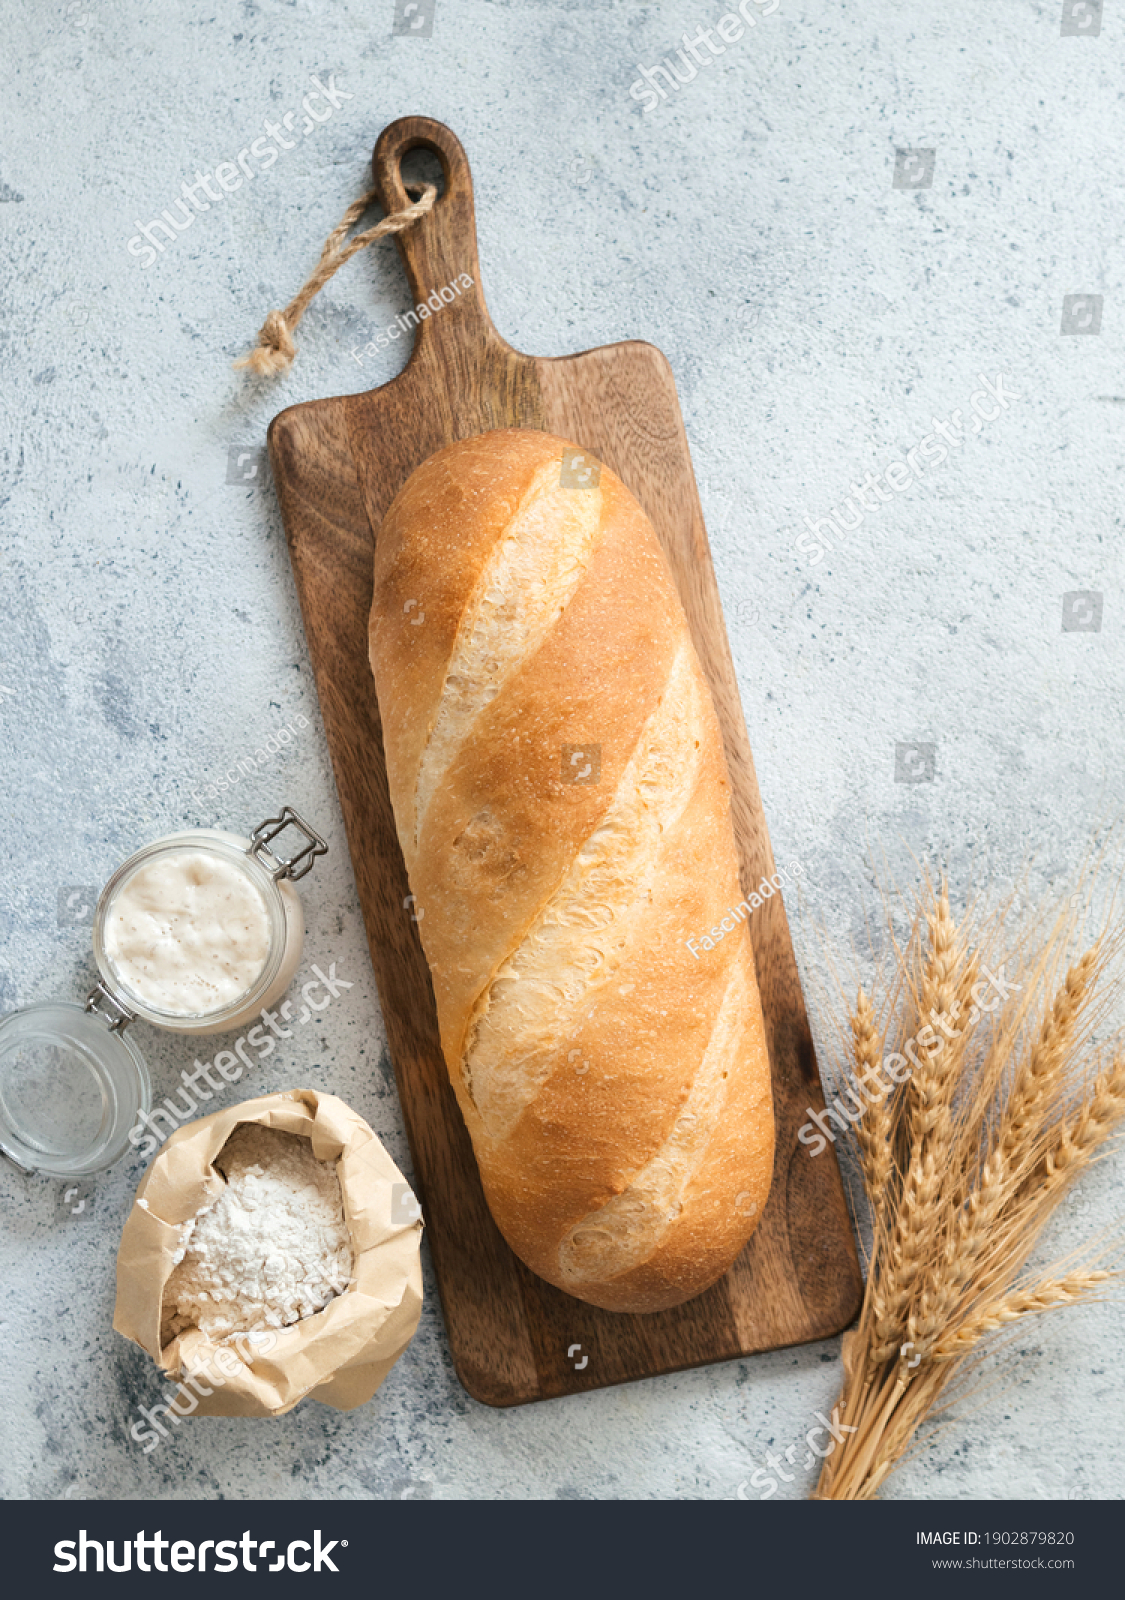 British White Bloomer or European sourdough Baton loaf bread on gray cement background. Fresh loaf bread, glass jar with sourdough starter, flour in paper bag and ears. Top view. Copy space. Vertical #1902879820